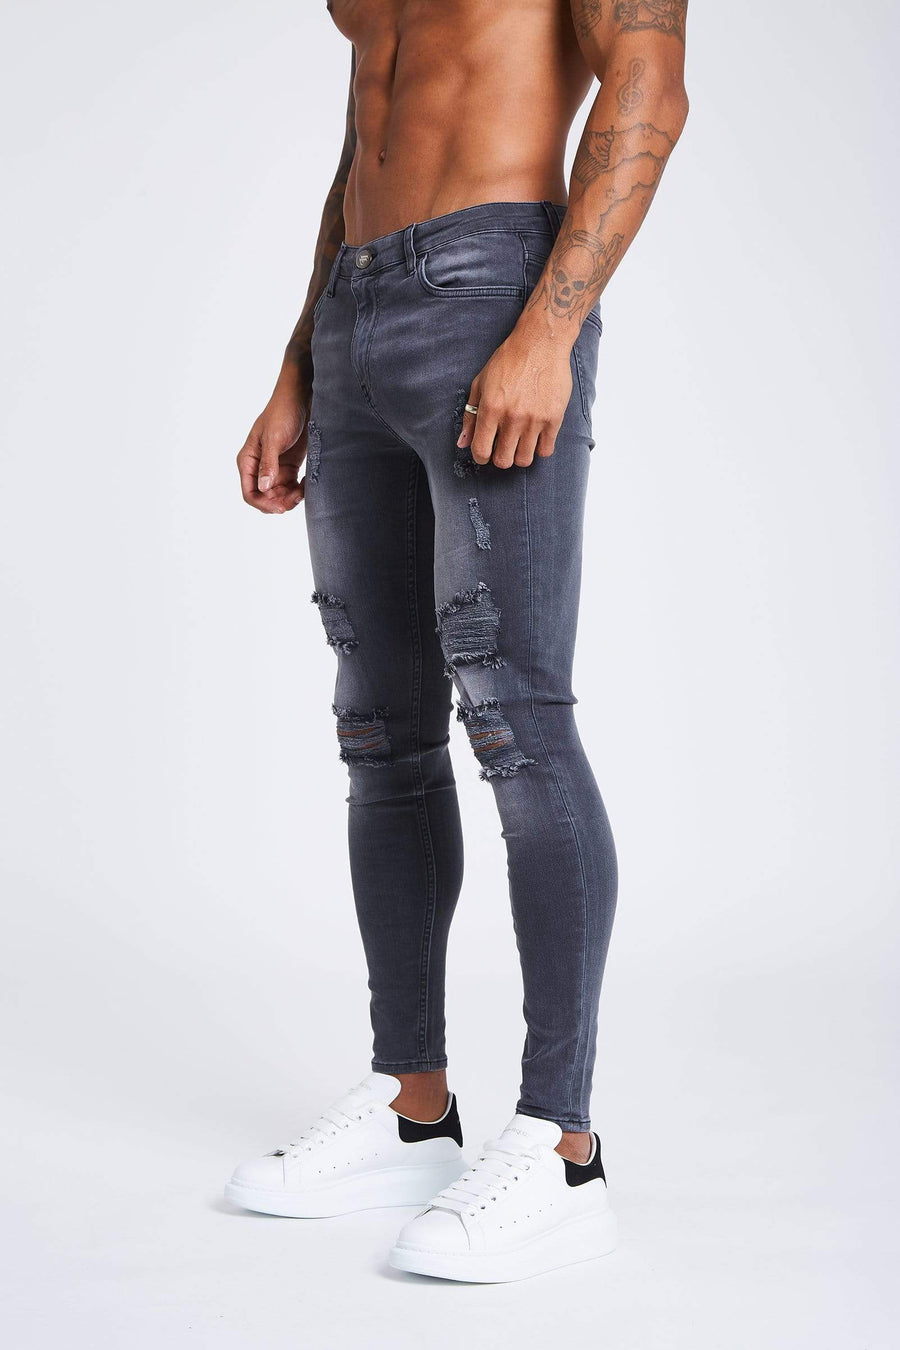 Legend London Jeans Light Grey Jeans - Ripped & Repaired